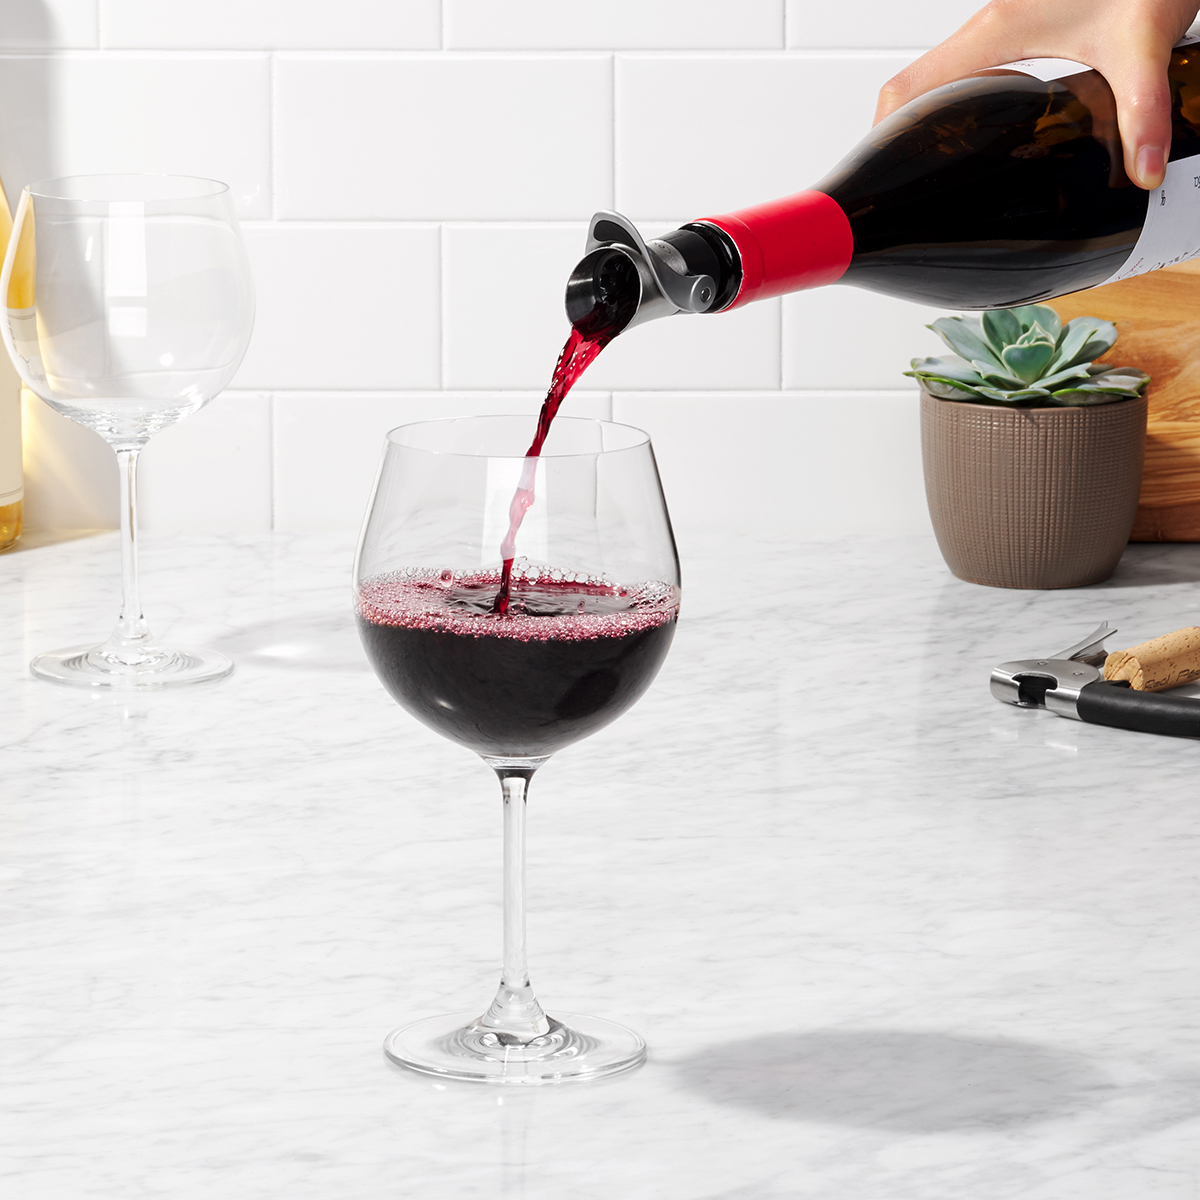 https://www.containerstore.com/catalogimages/428149/10086067-OXO-Wine-Stopper-Pourer-VEN.jpg